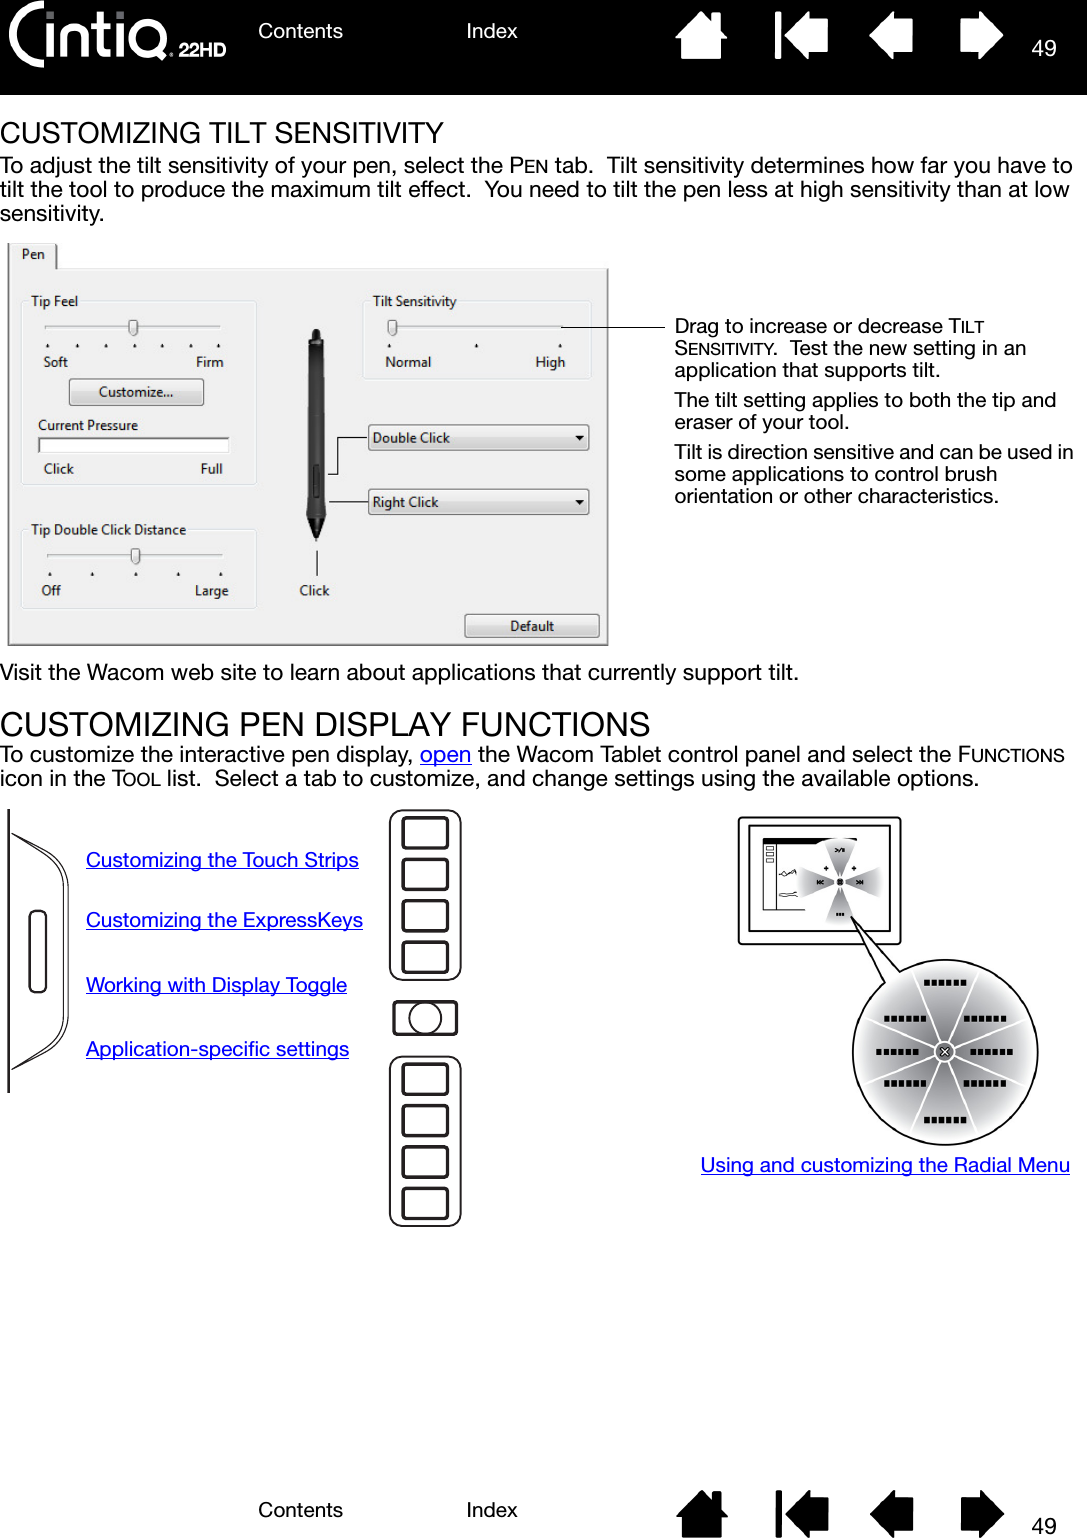 Contents IndexContents 49Index49CUSTOMIZING TILT SENSITIVITYTo adjust the tilt sensitivity of your pen, select the PEN tab.  Tilt sensitivity determines how far you have to tilt the tool to produce the maximum tilt effect.  You need to tilt the pen less at high sensitivity than at low sensitivity.Visit the Wacom web site to learn about applications that currently support tilt.CUSTOMIZING PEN DISPLAY FUNCTIONSTo customize the interactive pen display, open the Wacom Tablet control panel and select the FUNCTIONS icon in the TOOL list.  Select a tab to customize, and change settings using the available options.Drag to increase or decrease TILT SENSITIVITY.  Test the new setting in an application that supports tilt.  The tilt setting applies to both the tip and eraser of your tool.Tilt is direction sensitive and can be used in some applications to control brush orientation or other characteristics.Using and customizing the Radial MenuCustomizing the Touch StripsCustomizing the ExpressKeysWorking with Display ToggleApplication-specific settings